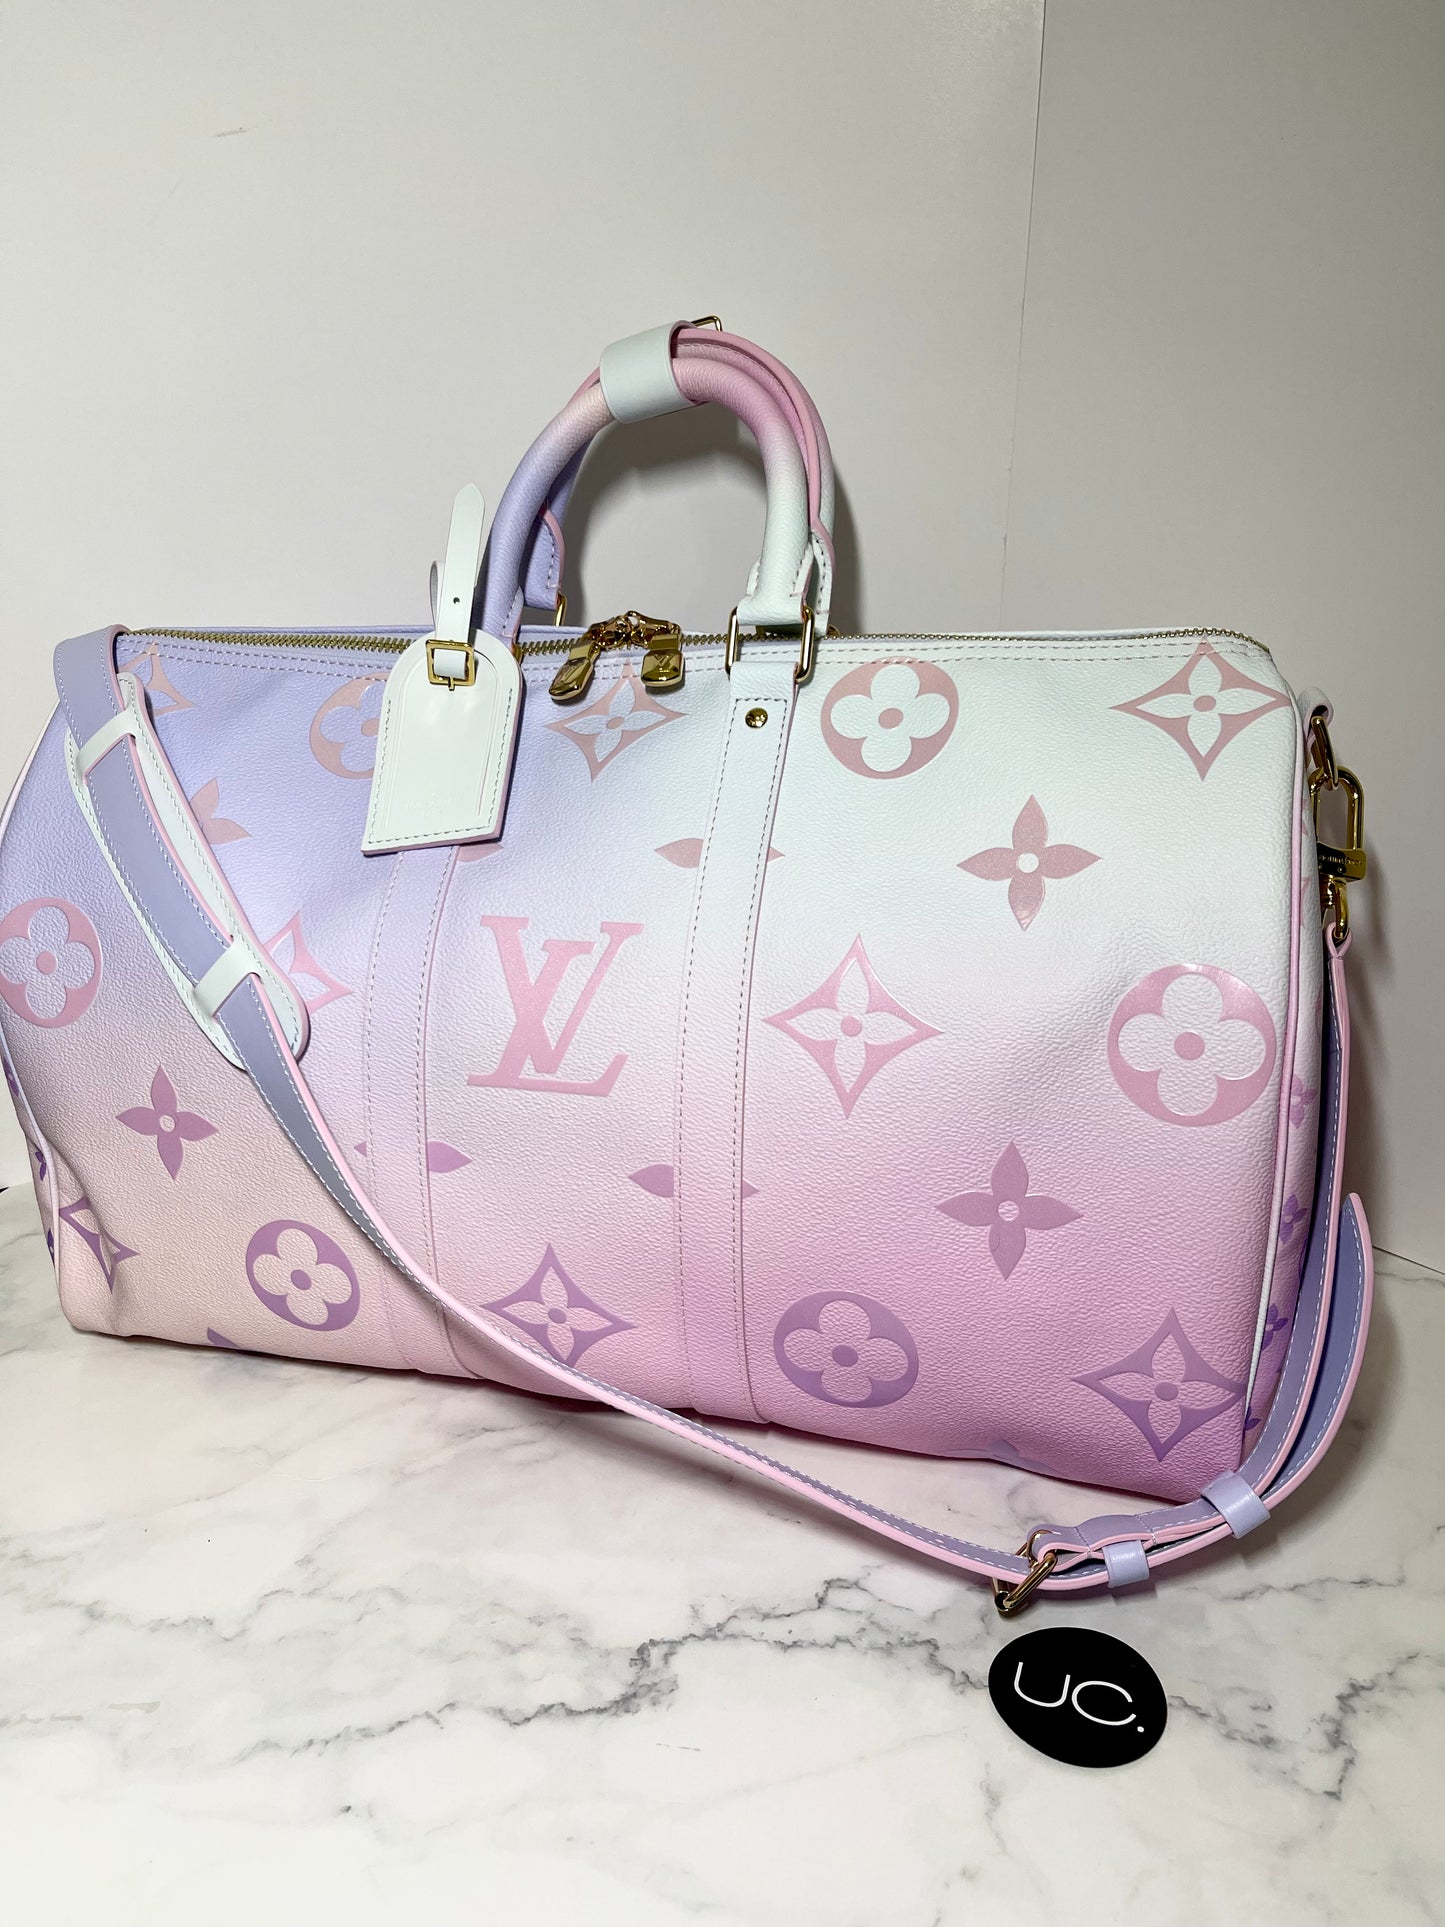 Louis Vuitton Keepall 45, Sunrise Monogram in Pastel Color, New in Dustbag  GA001